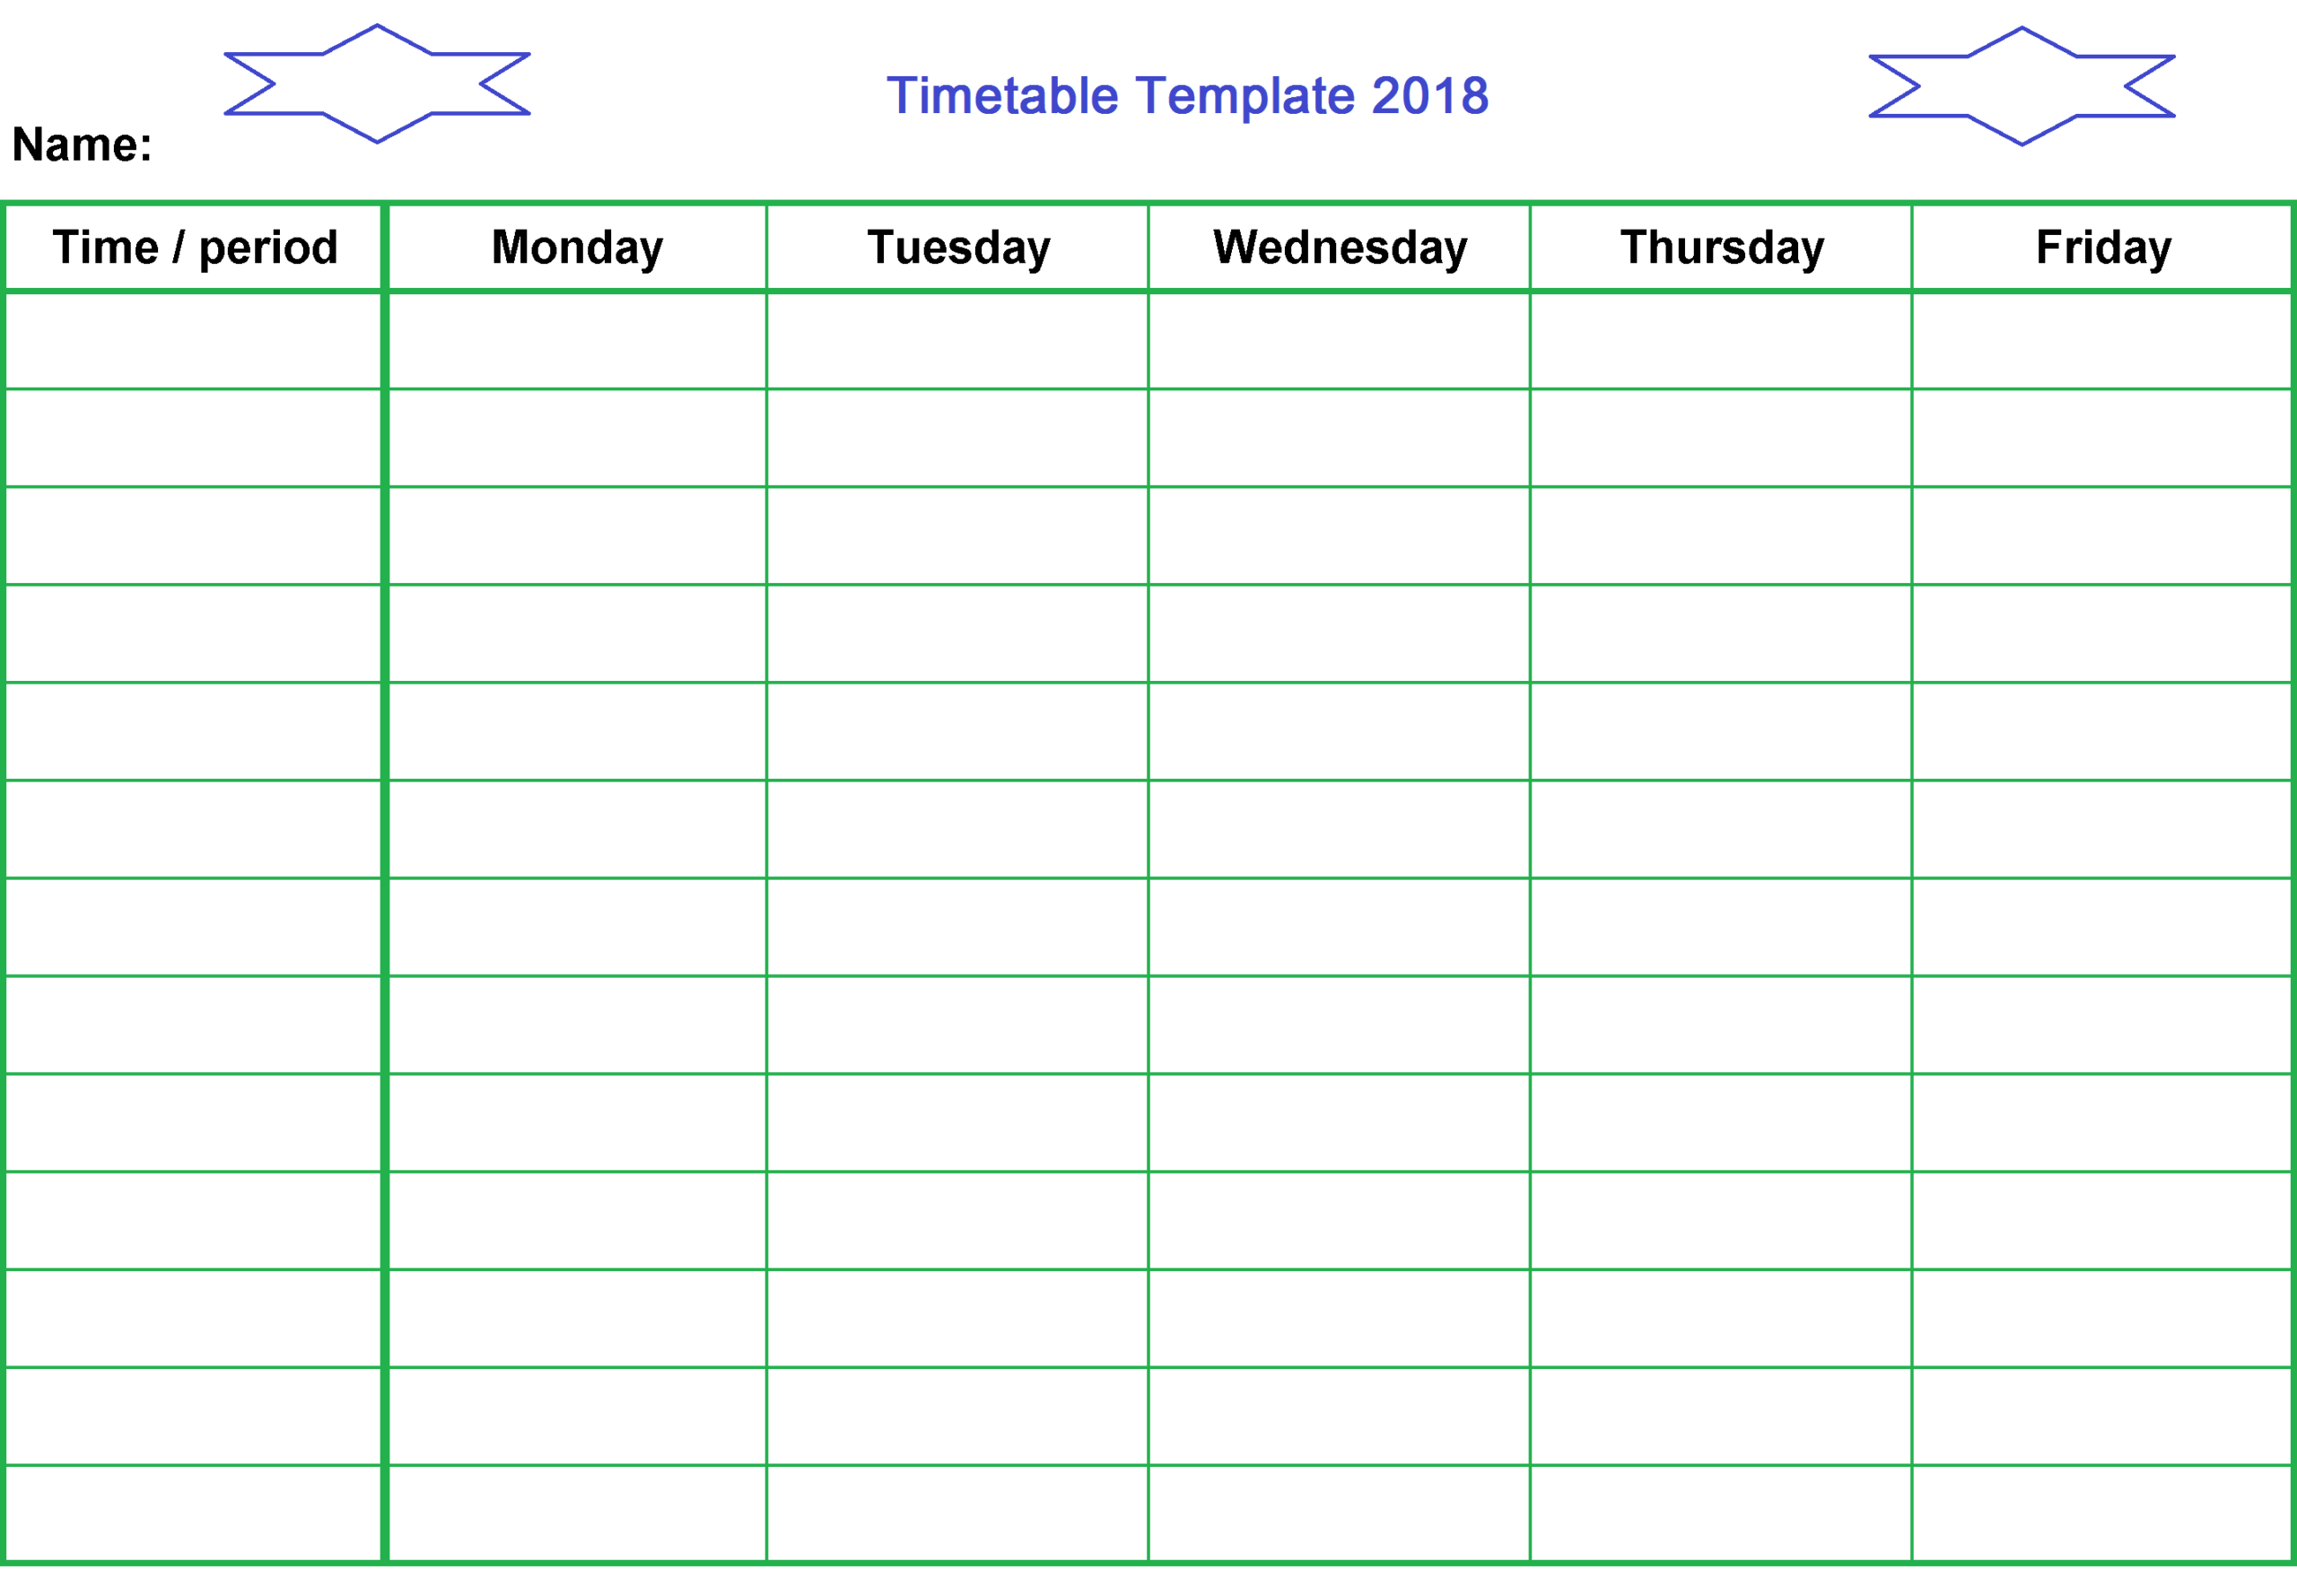 Timetable Template 2018 #schooltimetabletemplateword With Blank Revision Timetable Template